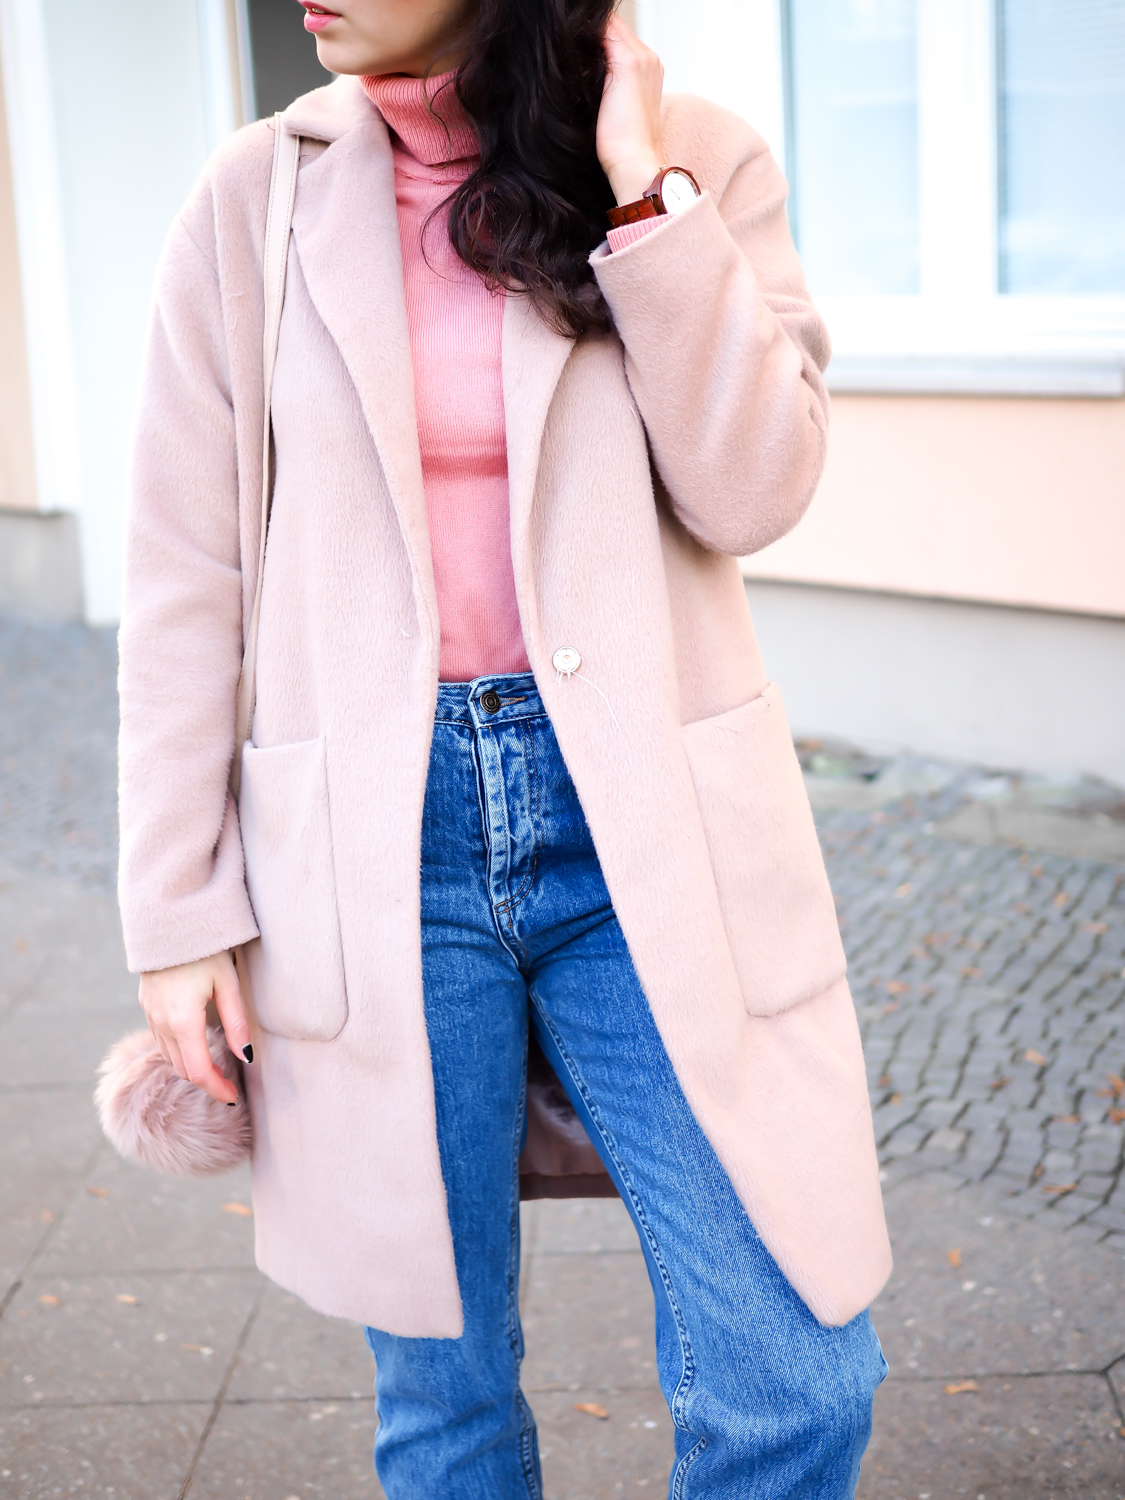 pink coat copper reeboks faces of stockholm pull and bear mom jeans sneaker girl look gerry weber candy colors sweater winter look samieze fashionblogger modeblog berlin